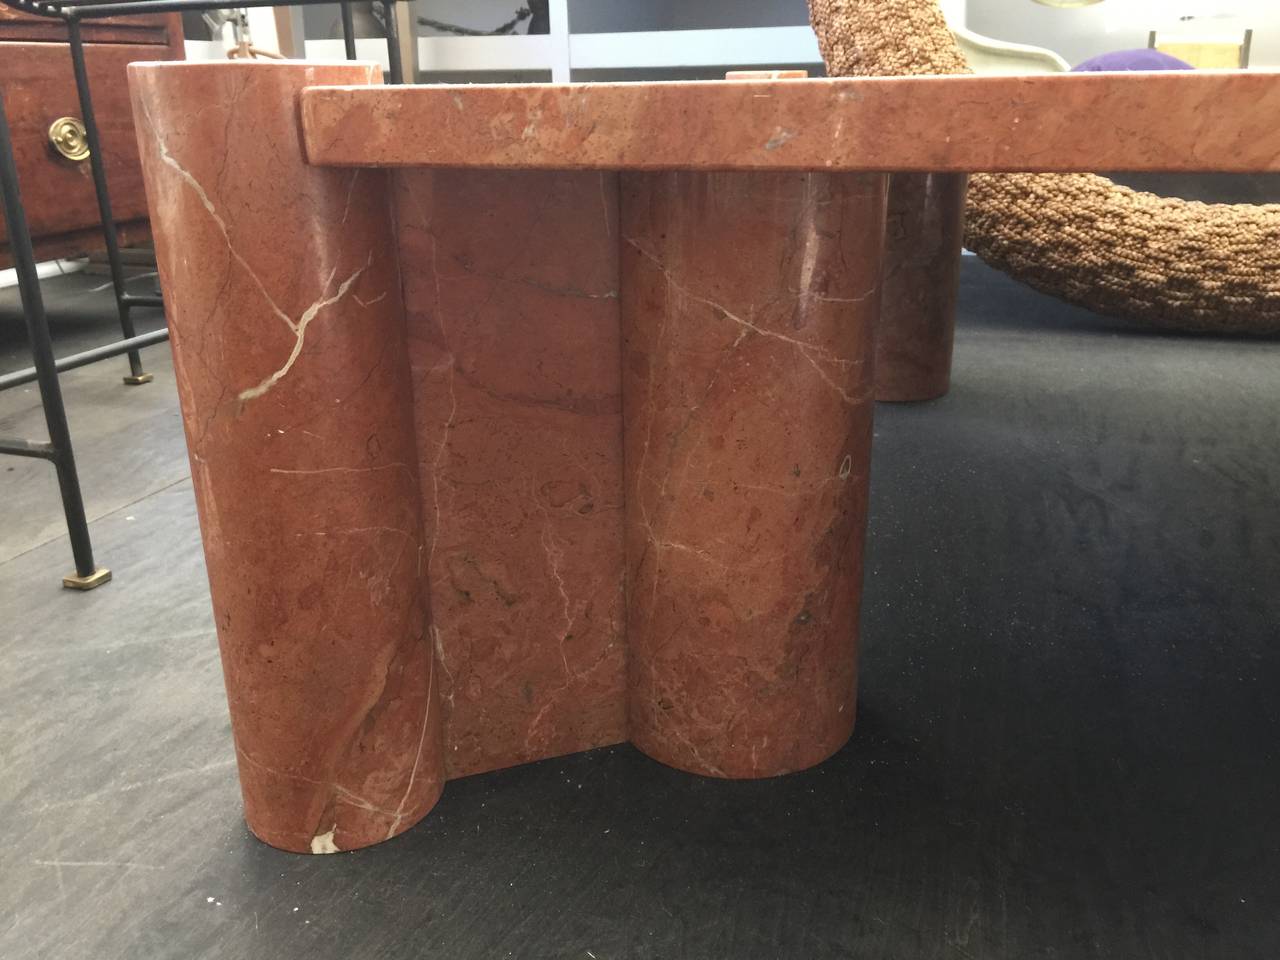 Oversized and heavy statement cocktail table crafted in Rosso marble.